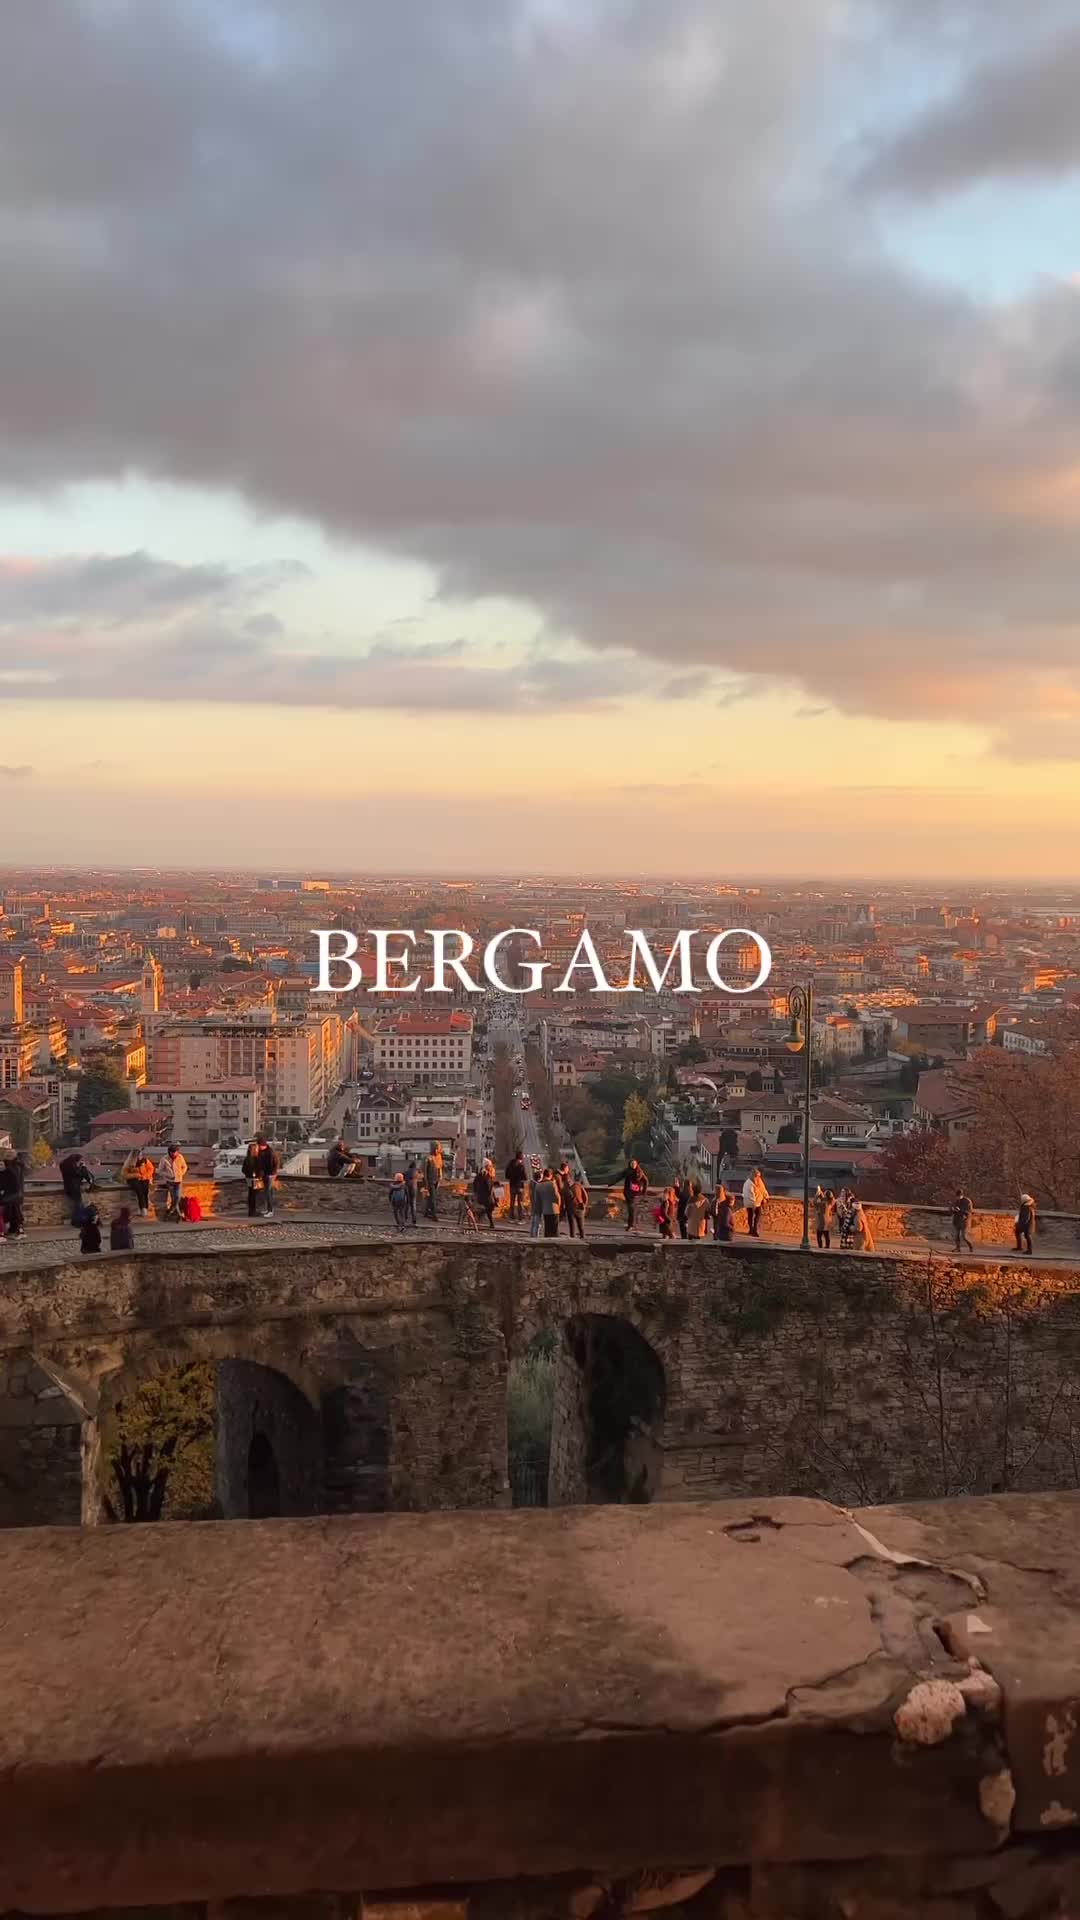 Bergamo, Italy 🧡🇮🇹 A great option if you plan to have a day trip from Milan, as it’s just 50 minutes away! 
Bergamo Alta is the oldest town and the one you’ll want to visit 😍 It has a beautiful city centre with many places to visit and great food options 🧡 Have you already visited Bergamo? #bergamo #italia #italy #lombardia